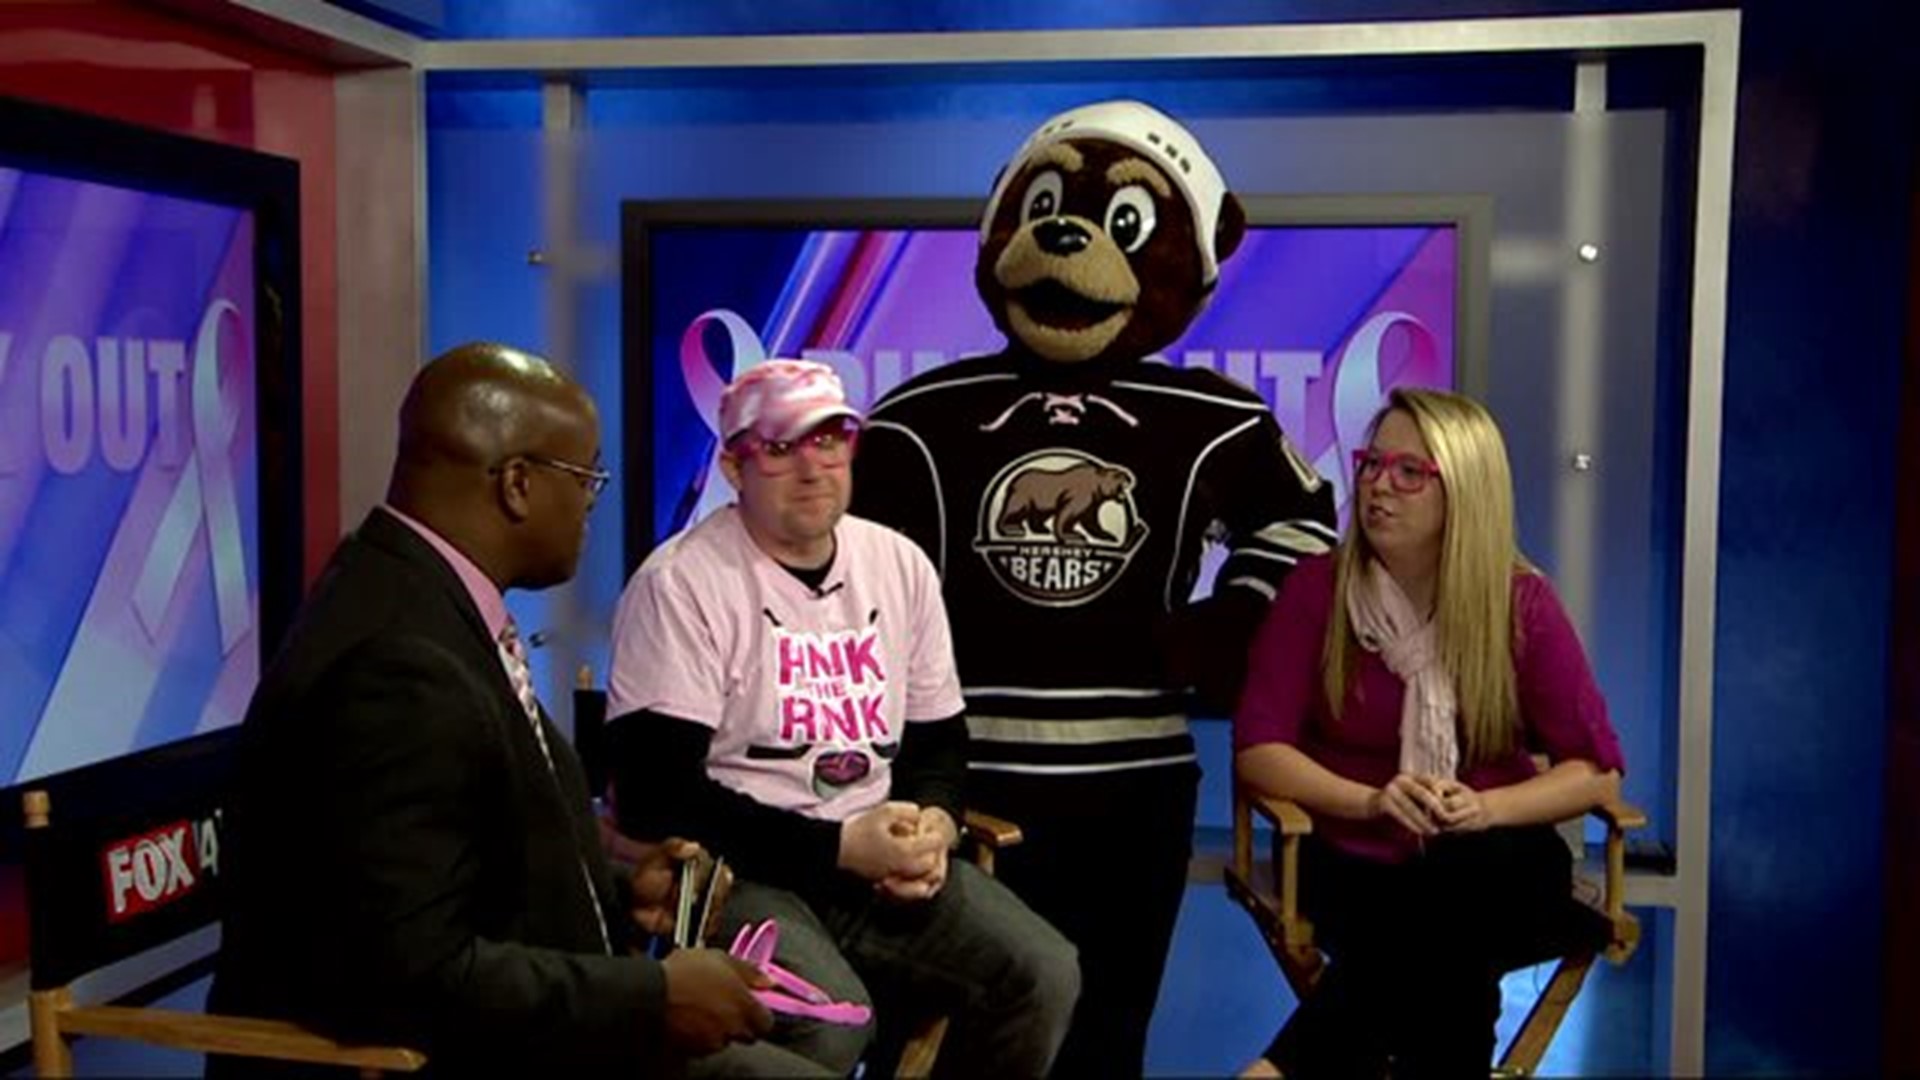 Pink the Rink! Comes to the Giant Center this weekend